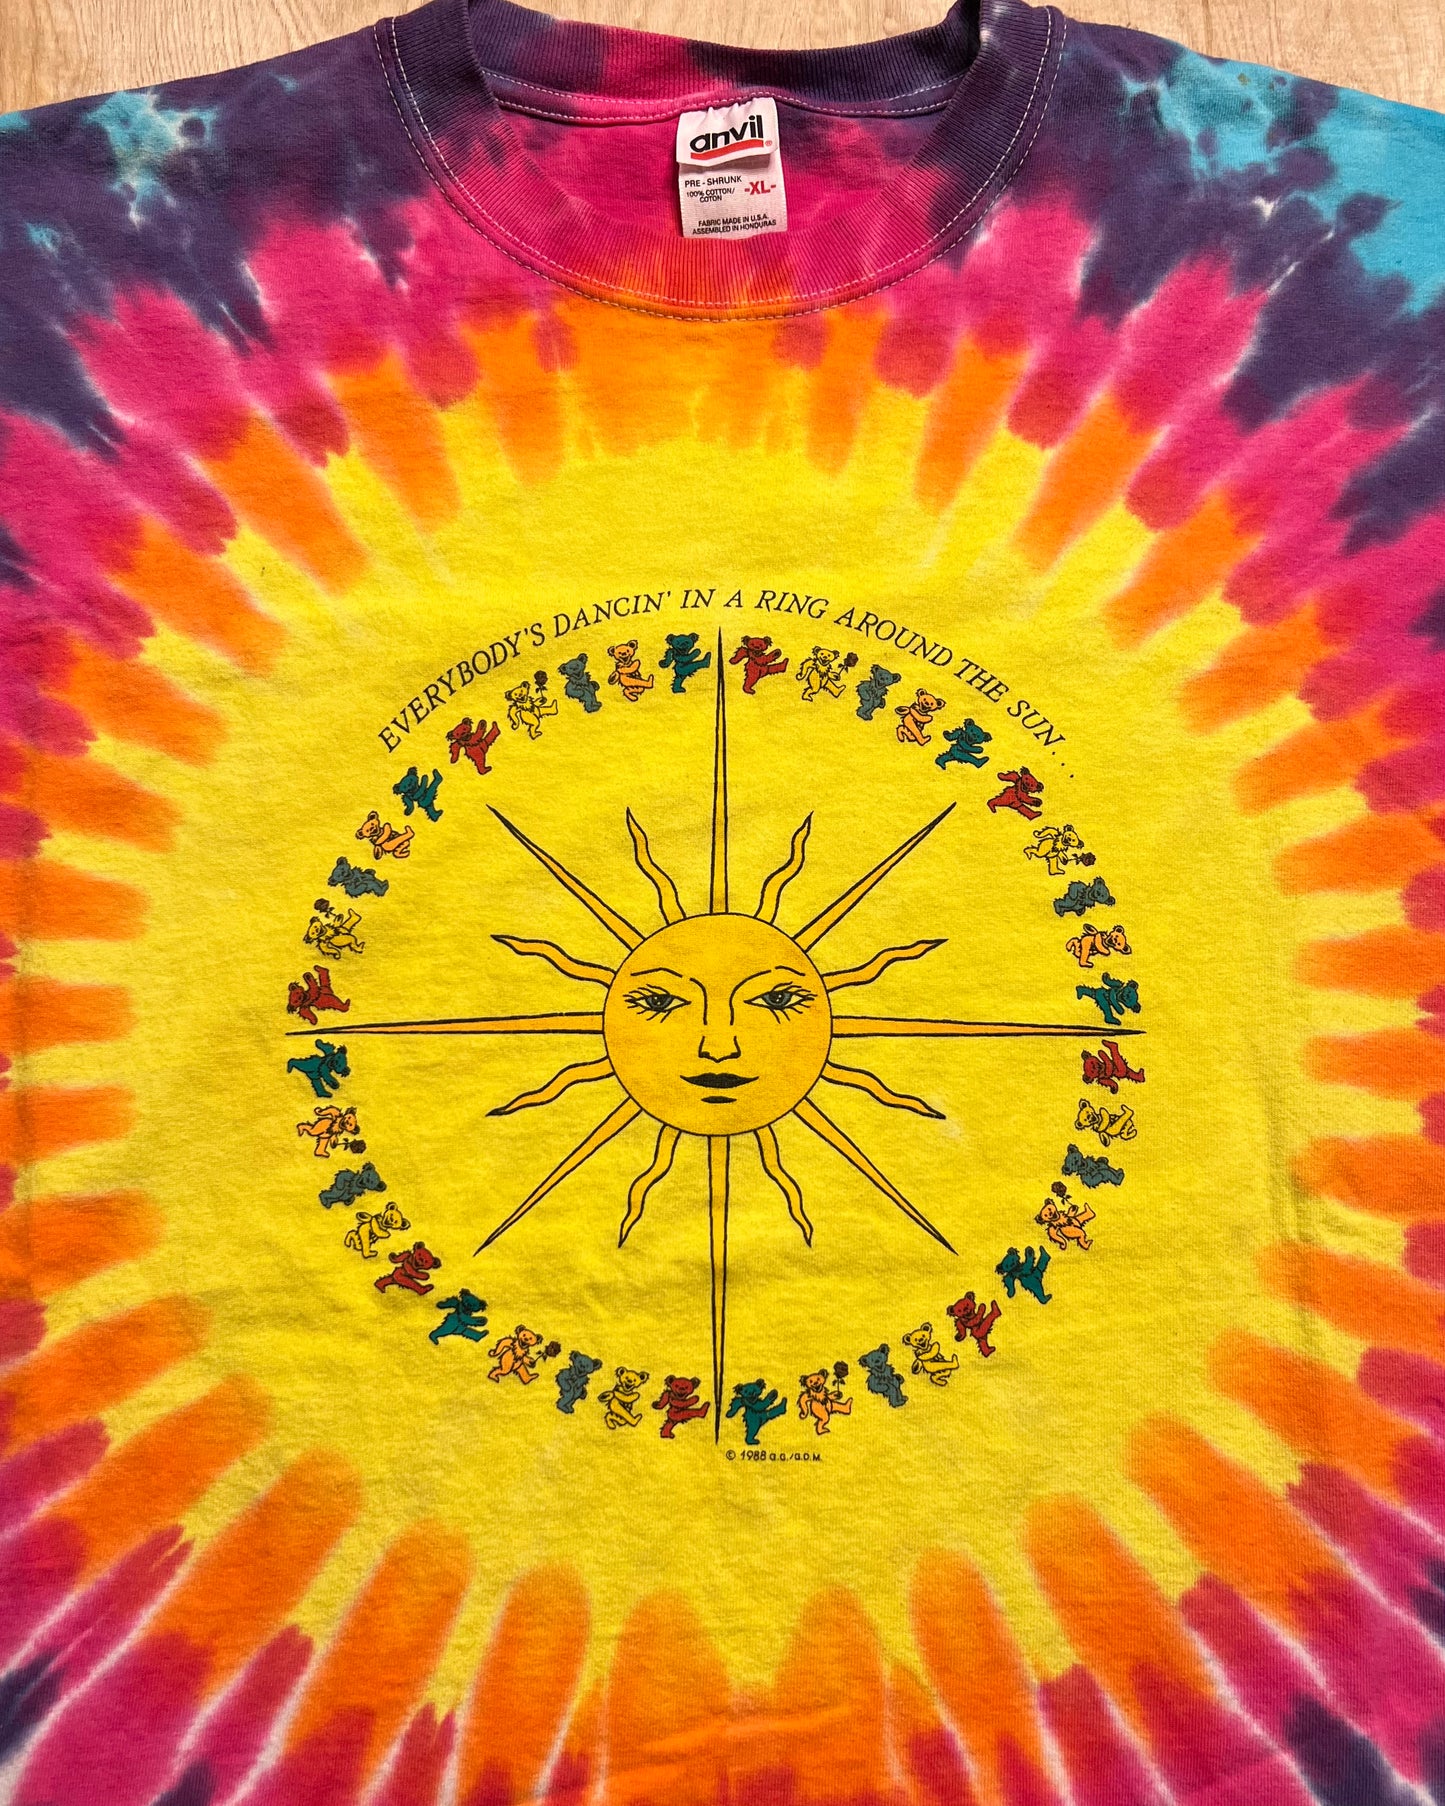 Vintage Grateful Dead " Everybody's Dancin' In A Ring Around The Sun" T-Shirt